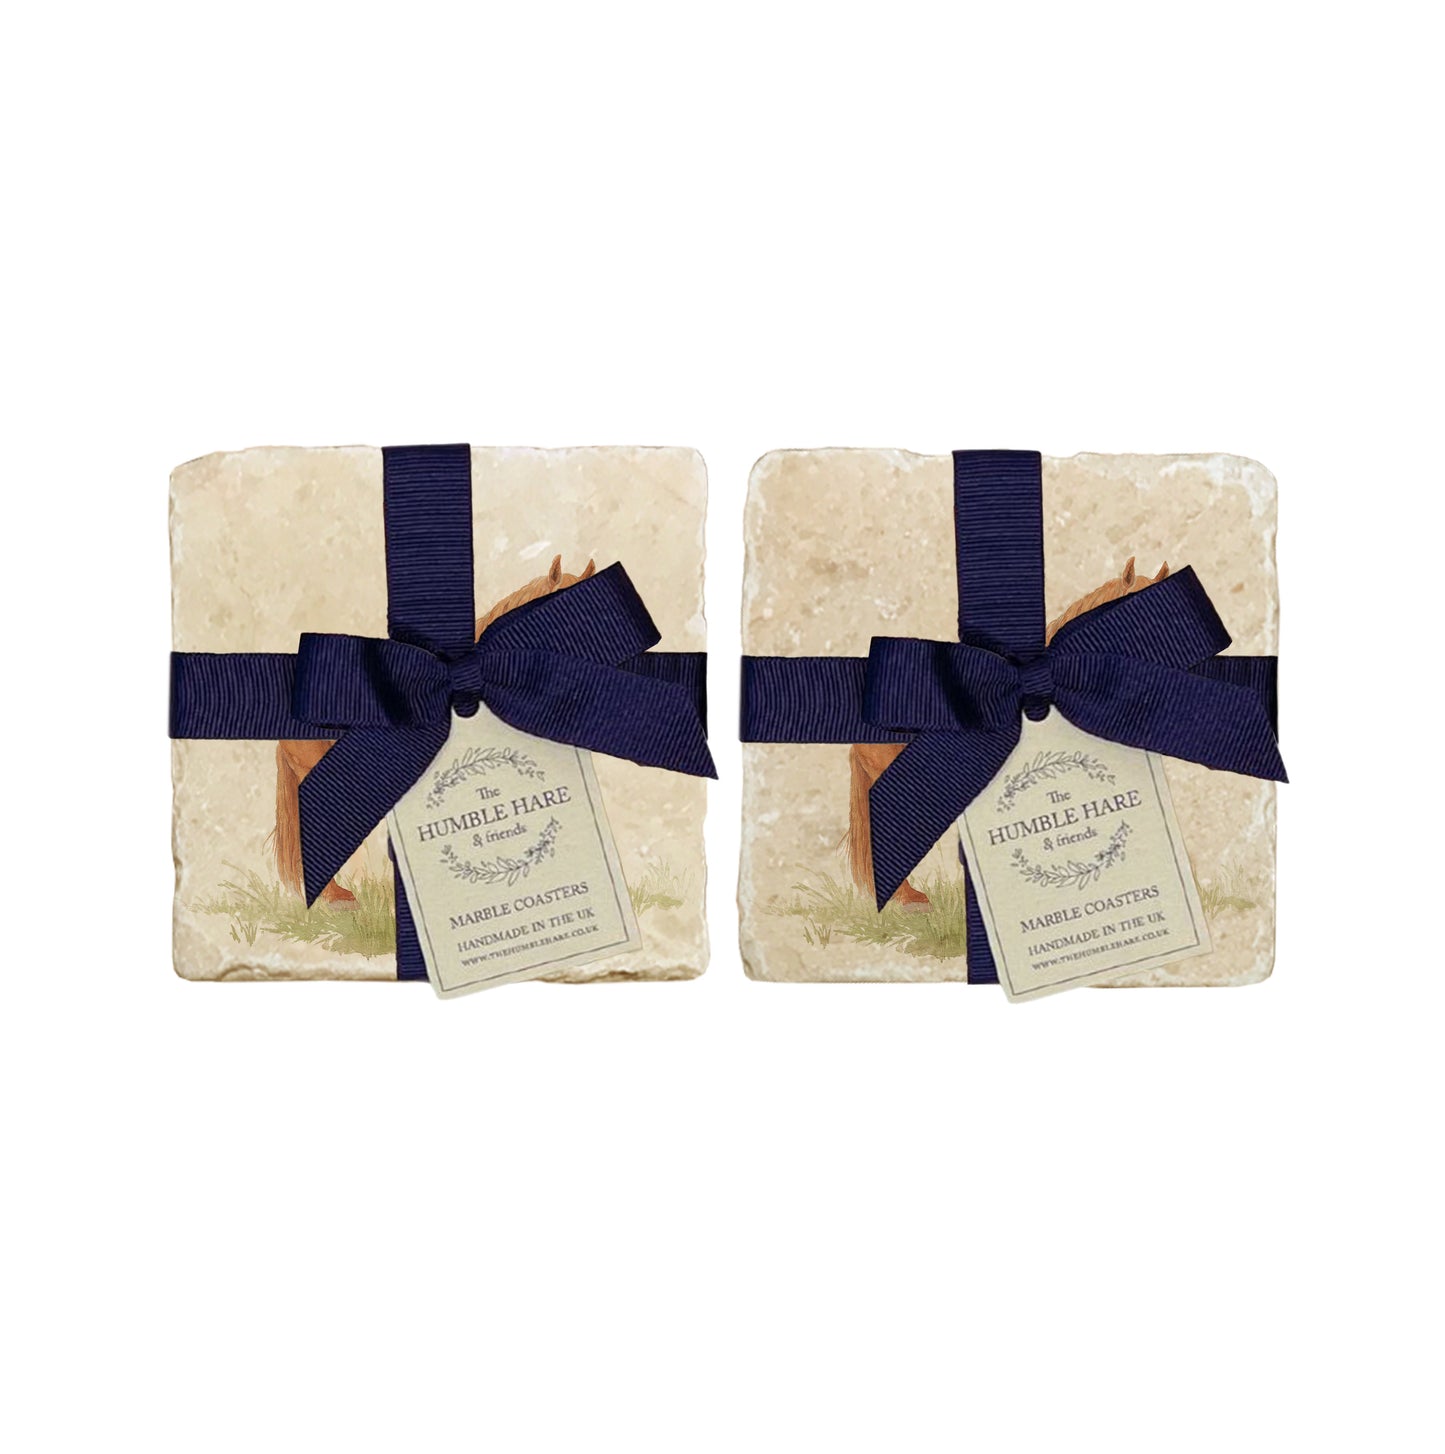 A set of 4 handmade marble coasters featuring a watercolour Suffolk Punch horse design, packaged in 2 pairs, with a luxurious blue bow and gift tag.